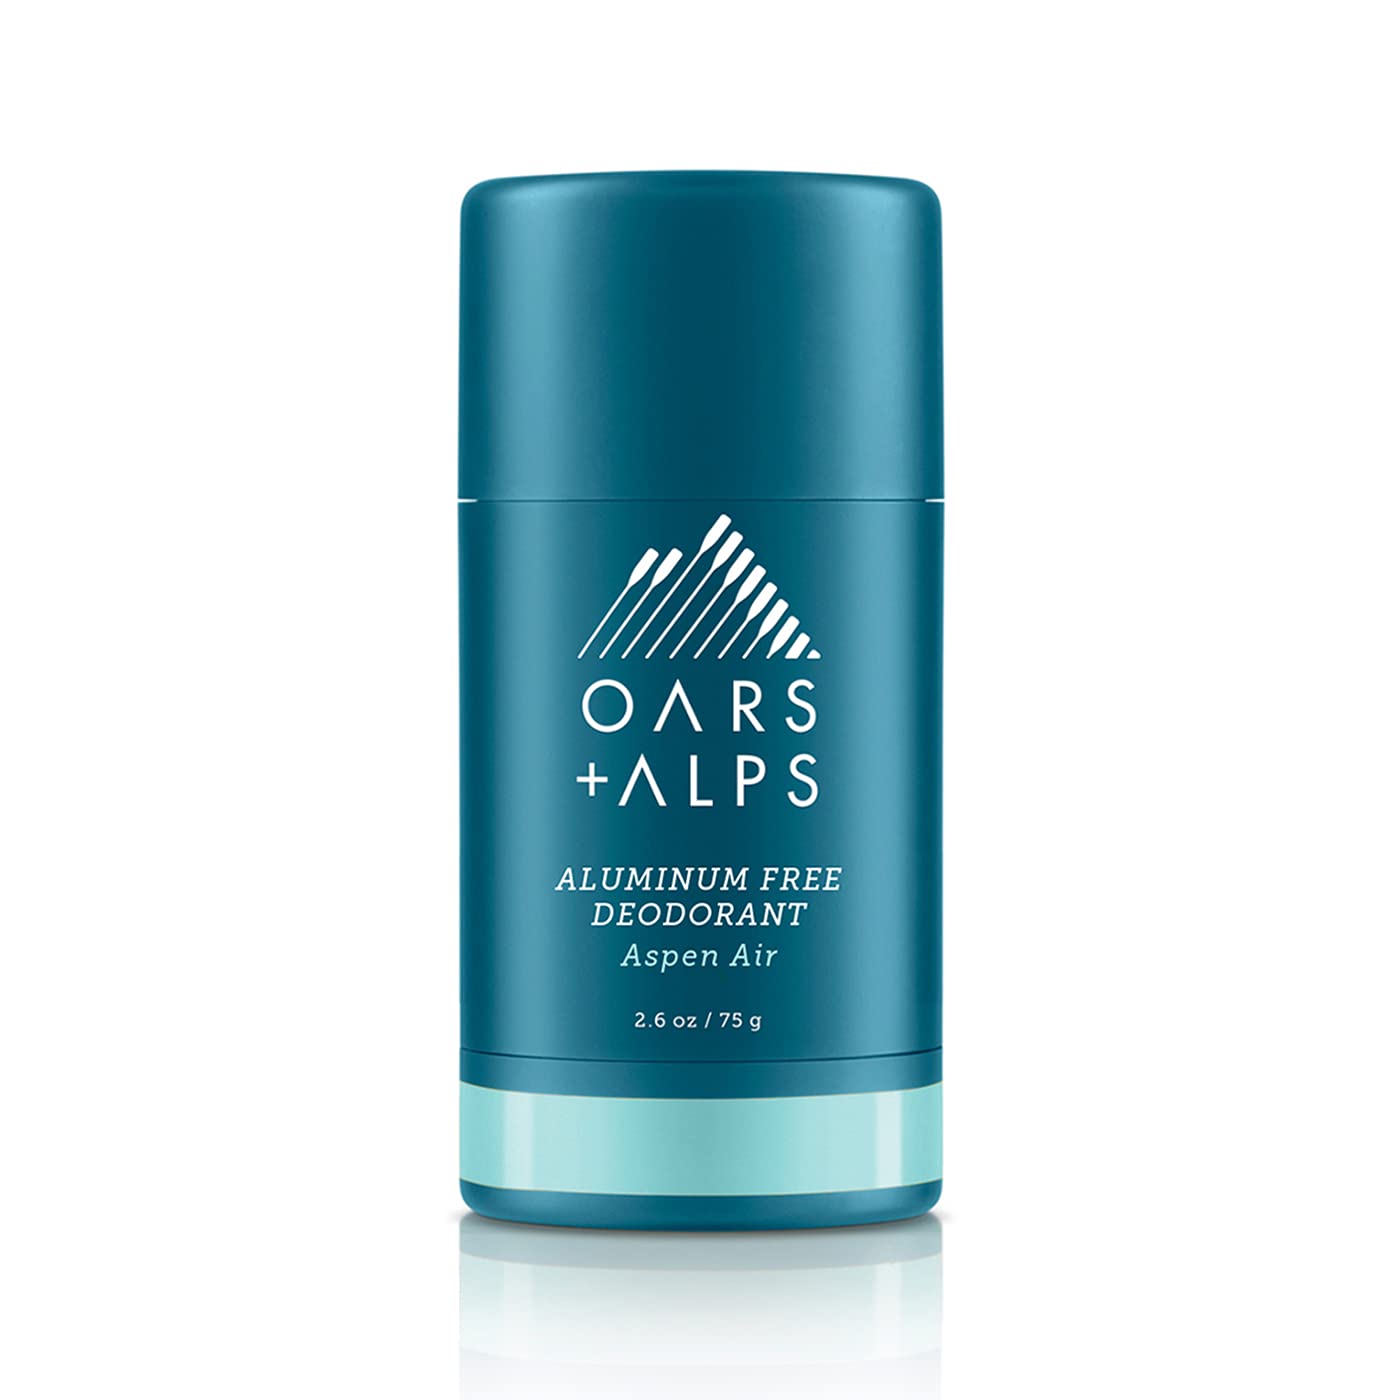 Oars + Alps Aluminum Free Deodorant for Men and Women, Dermatologist Tested and Made with Clean Ingredients, Travel Size, Aspen Air, 1 Pack, 2.6 Oz